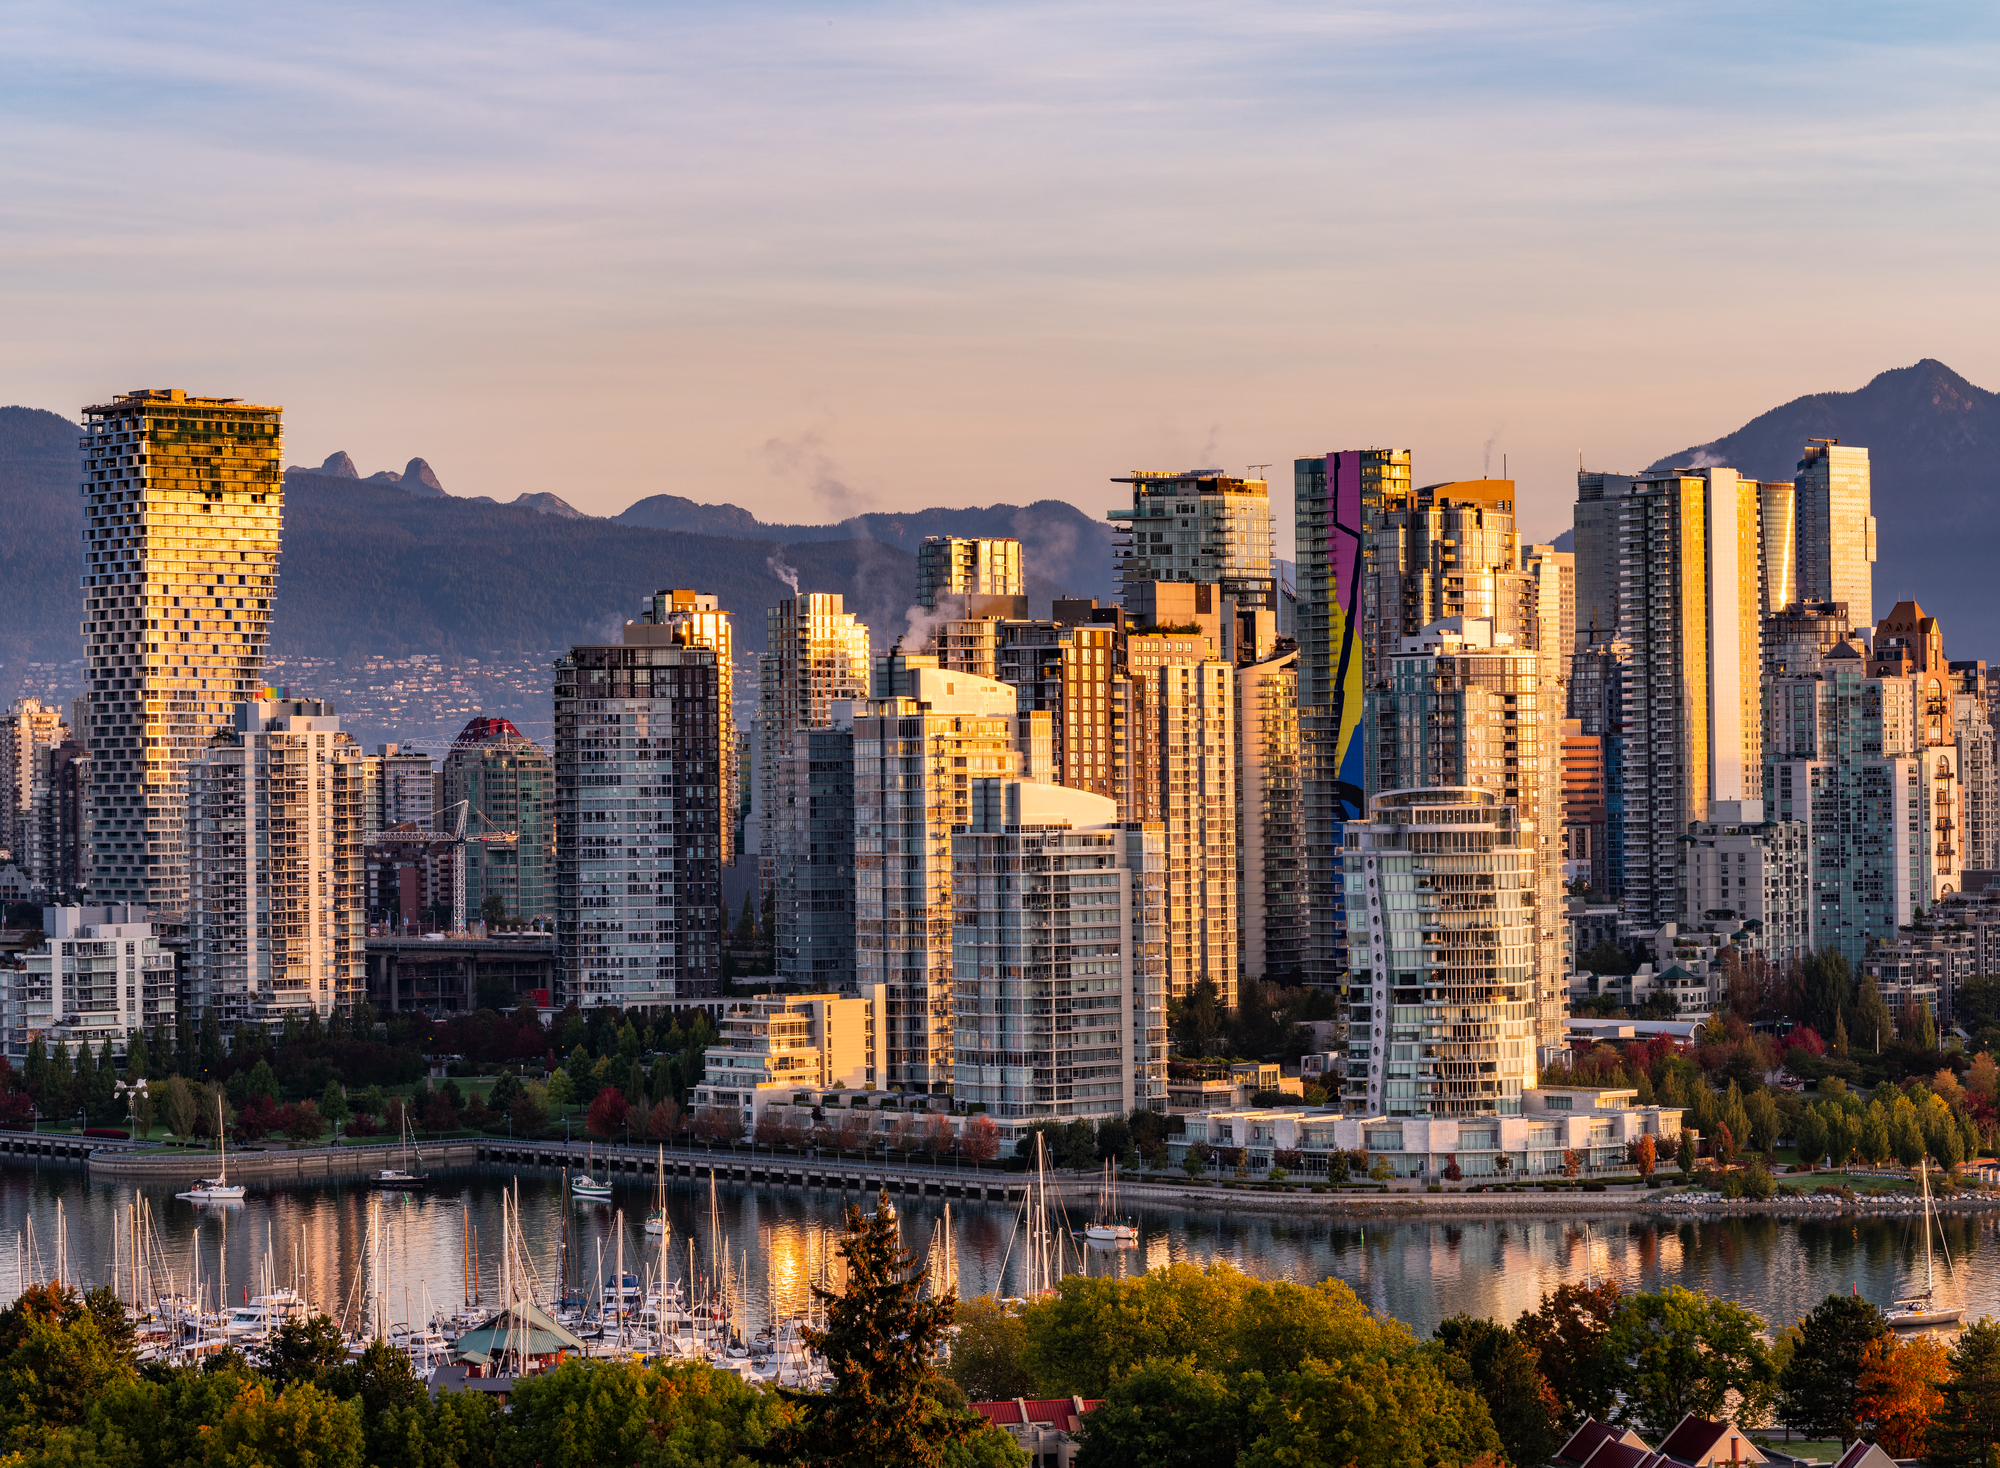 Aerial photo of Vancouver skyline as the sunsets. The light reflects off the downtown skyscrapers and the mountains are seen in the distance.